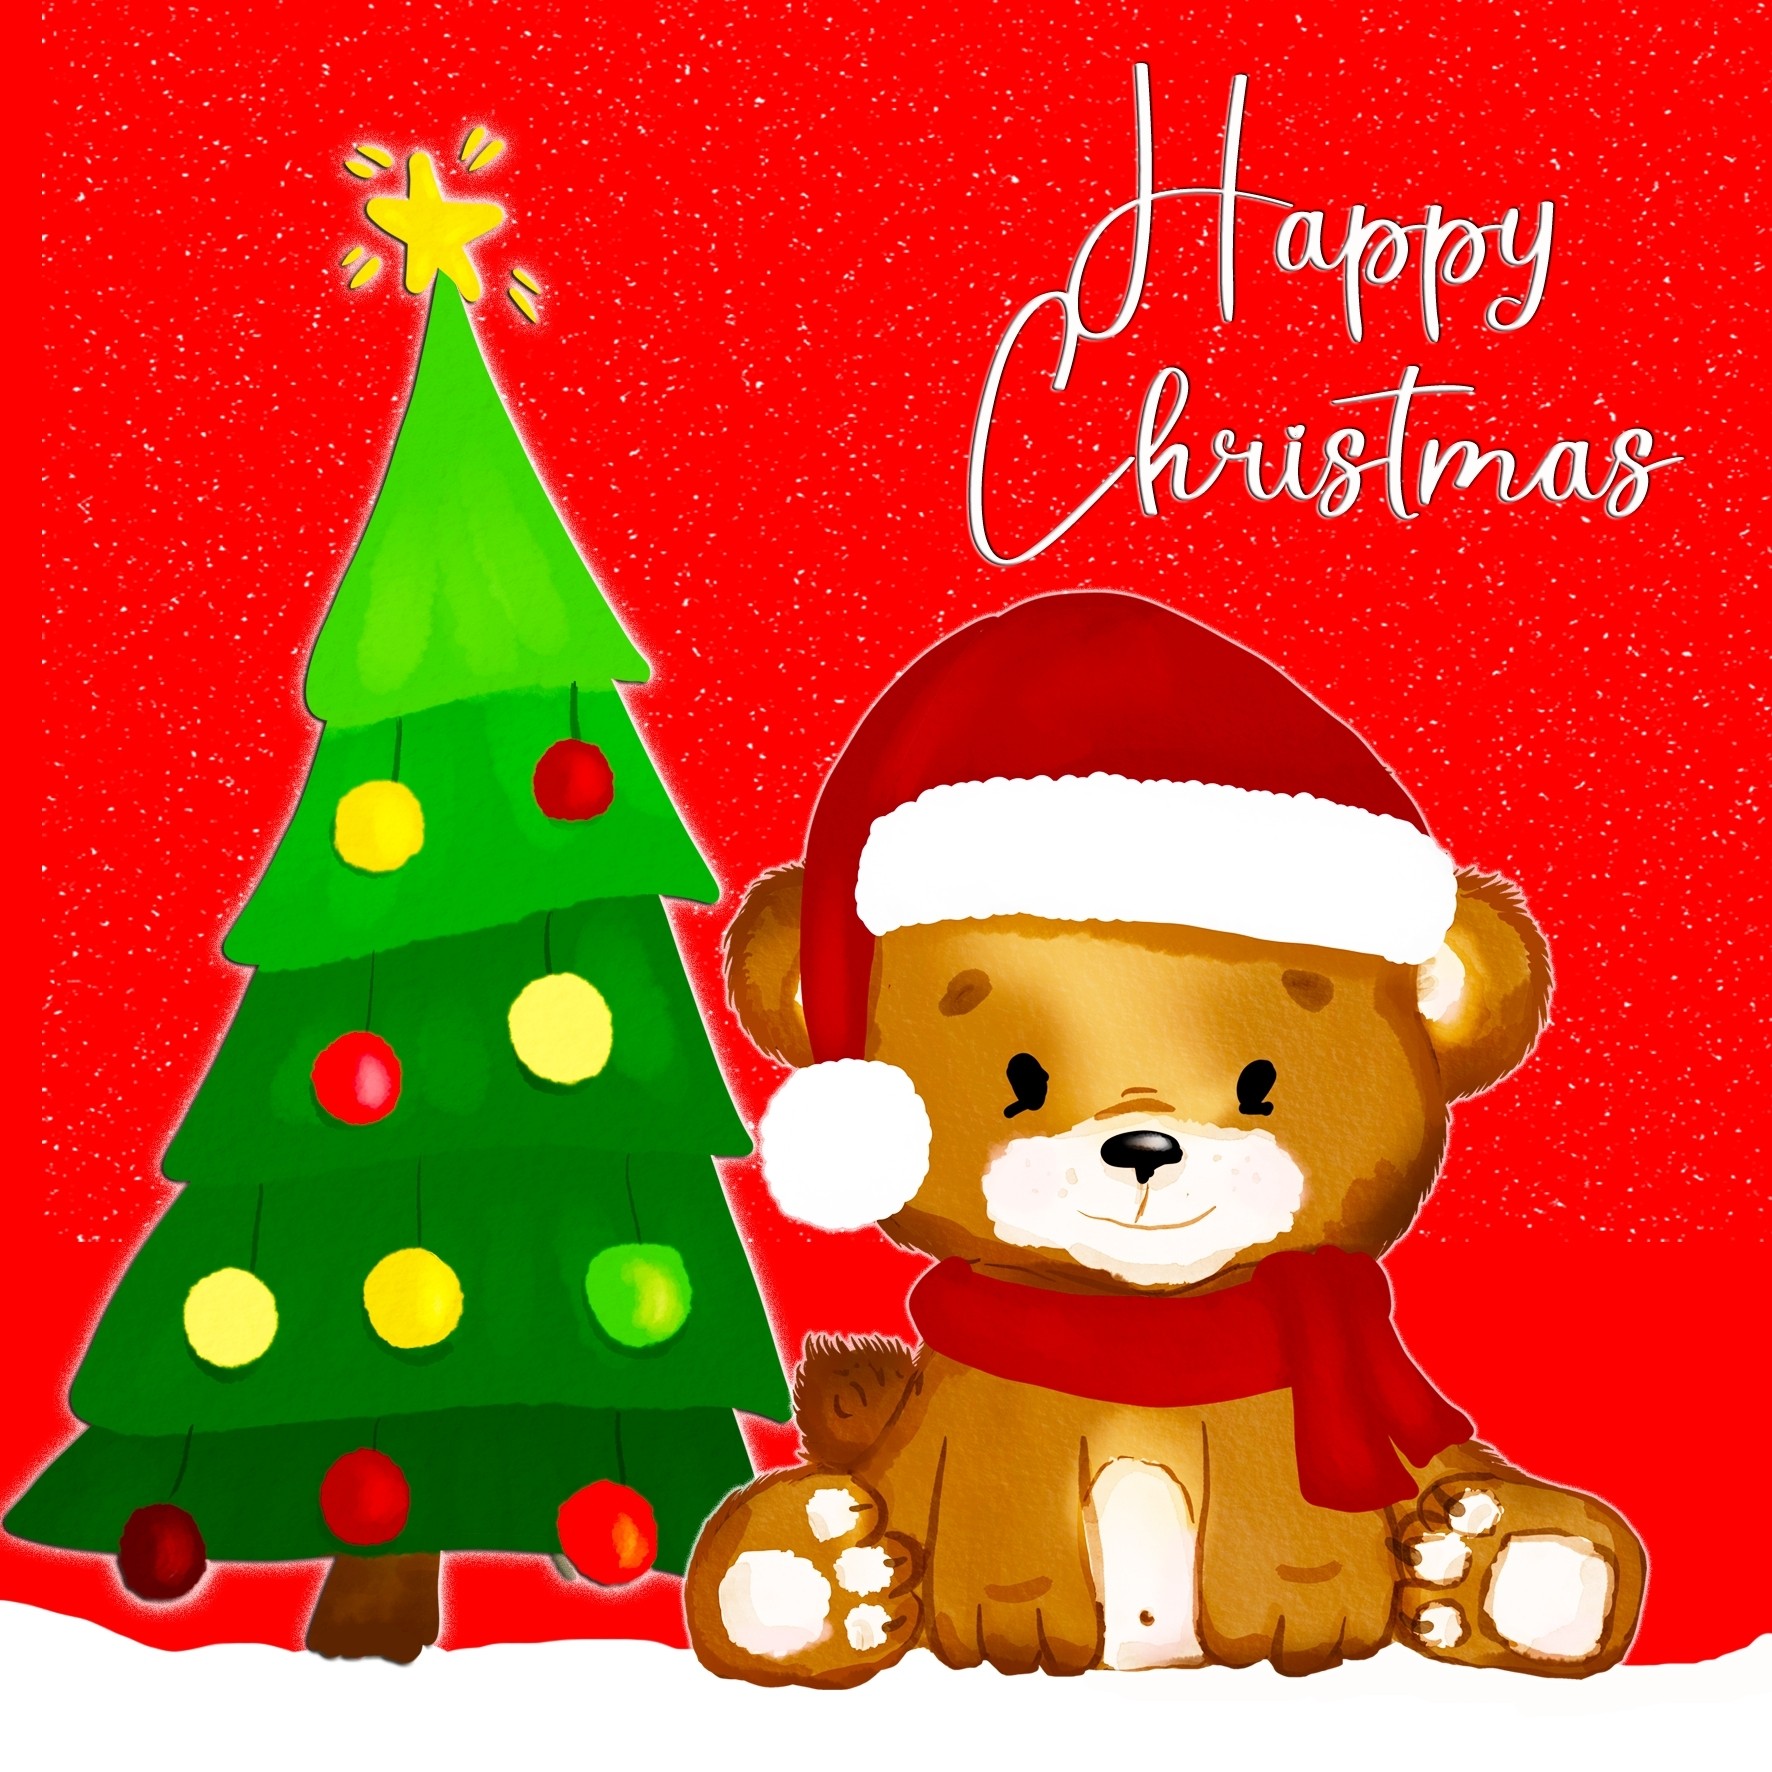 Happy Christmas Square Card (Red Tree)